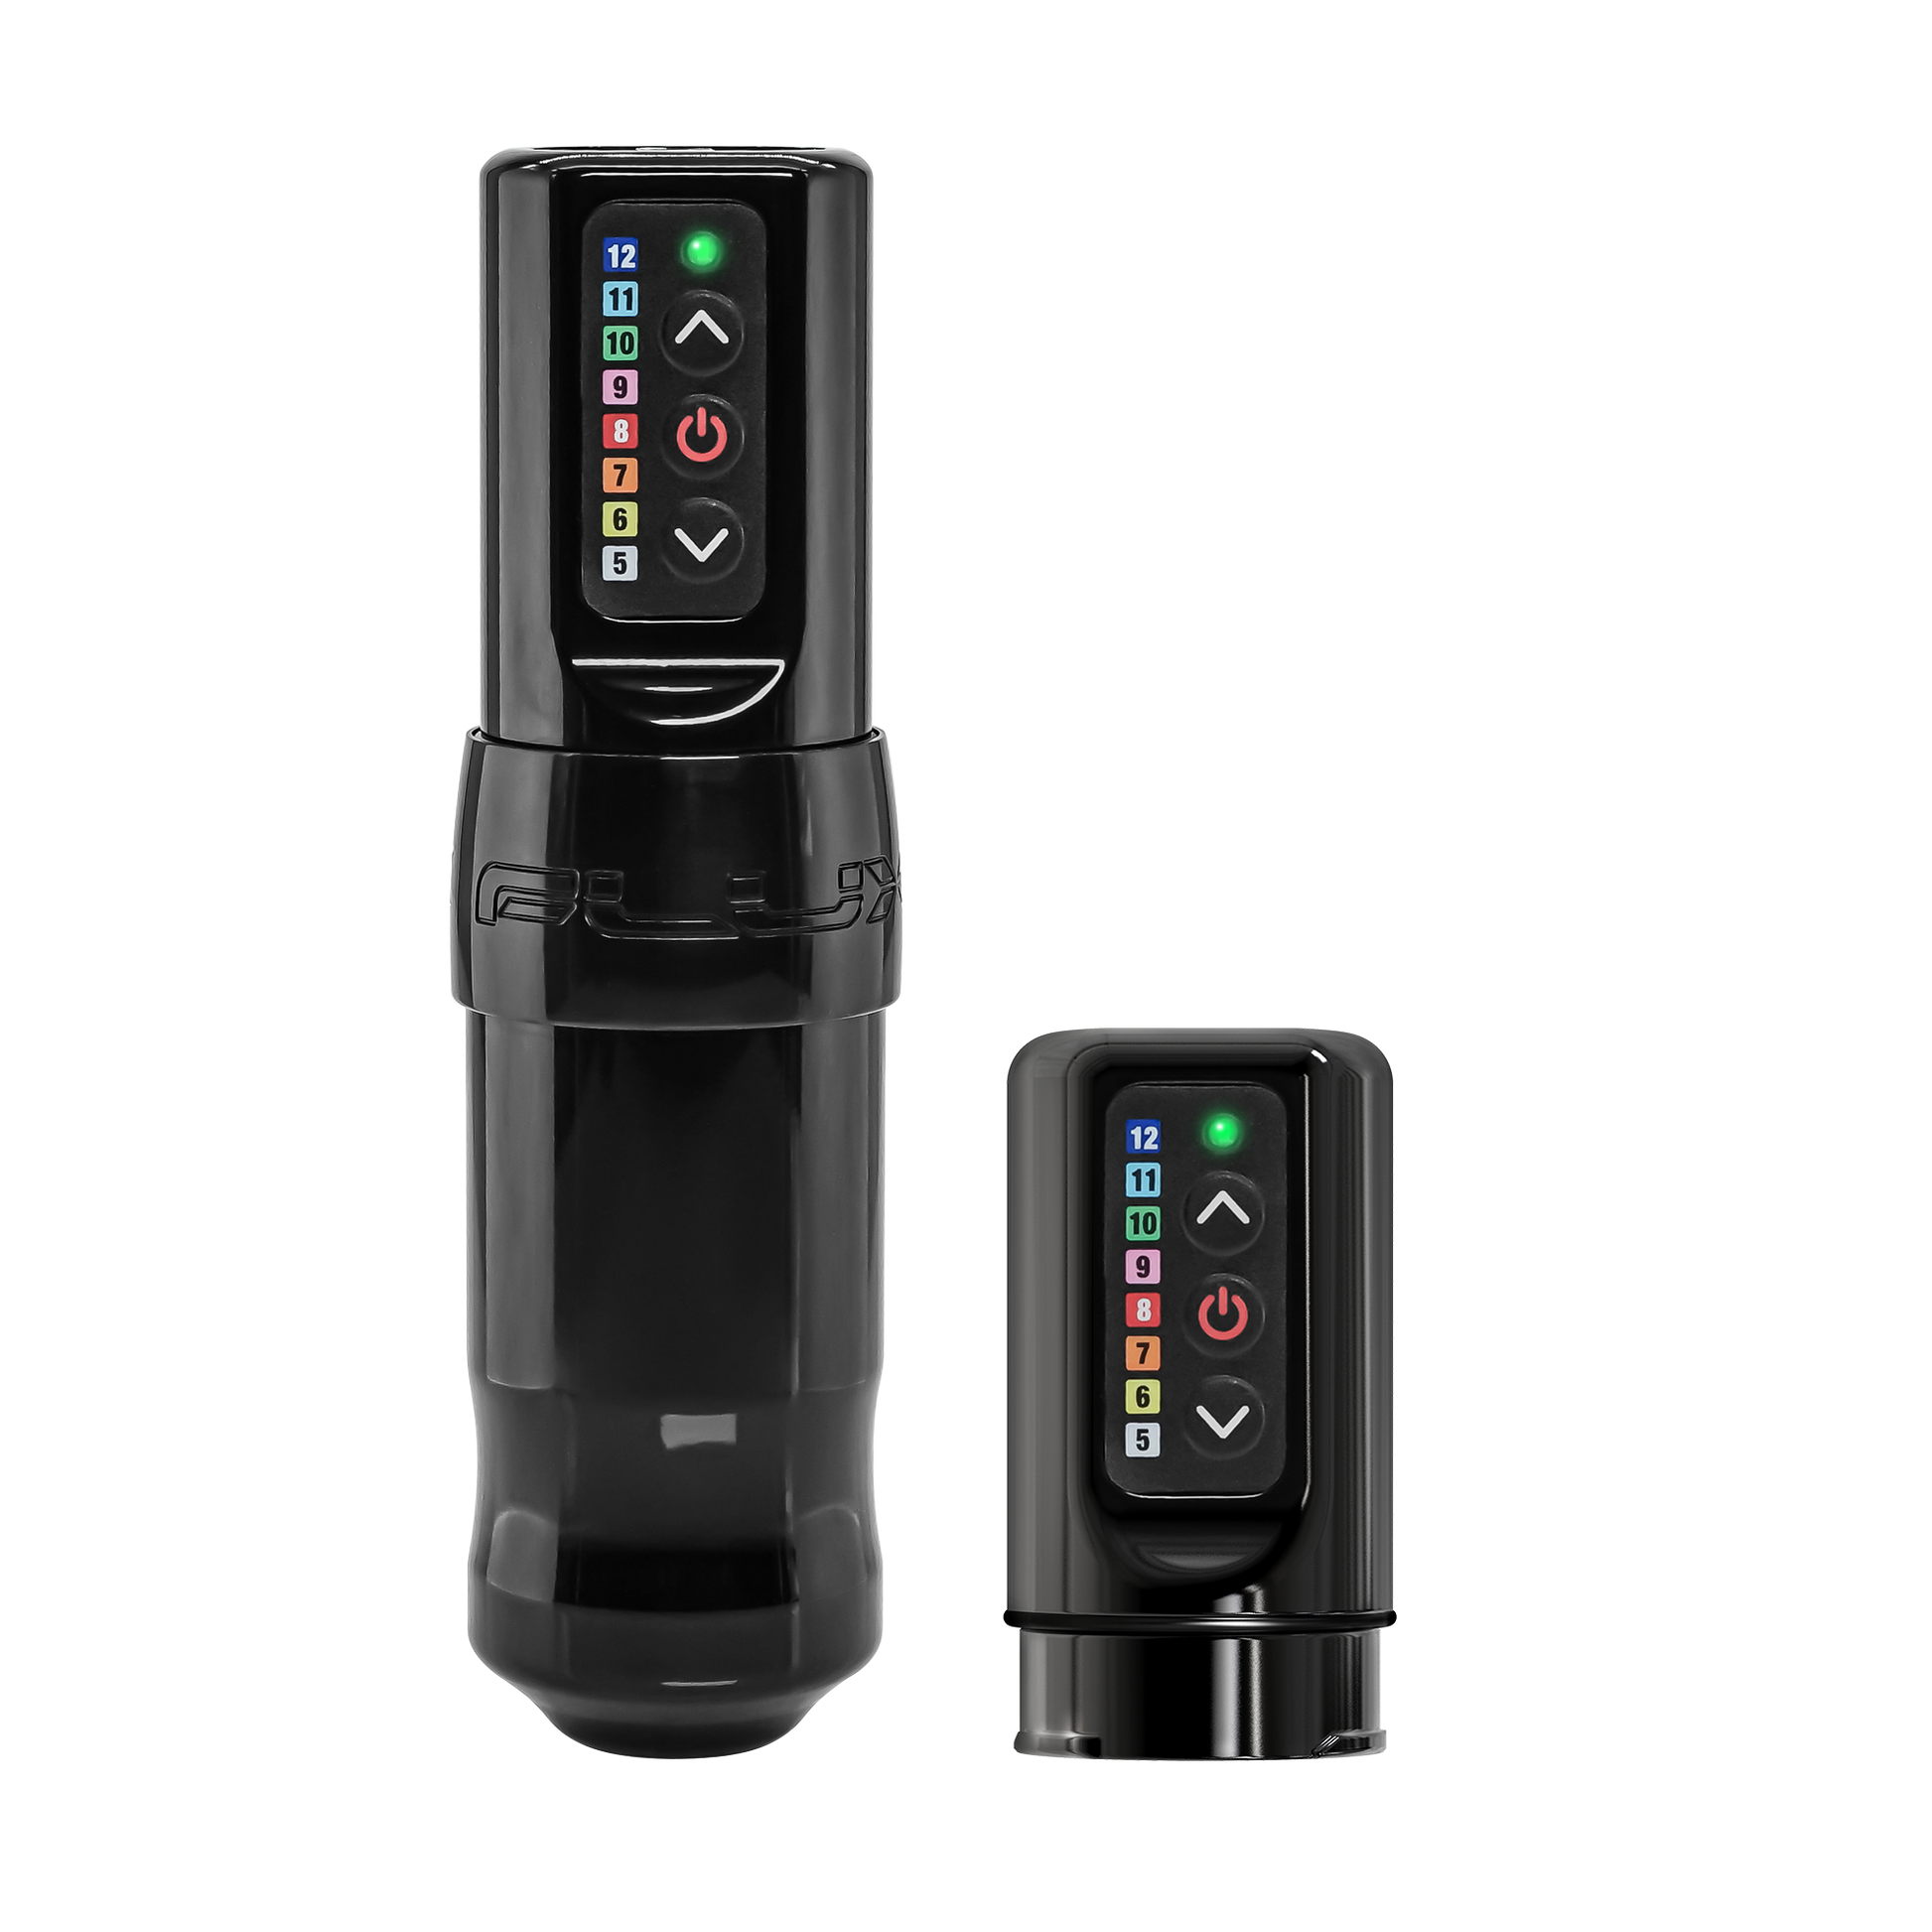 Wireless tattoo machine, the Spektra Flux, shown with an extra battery pack